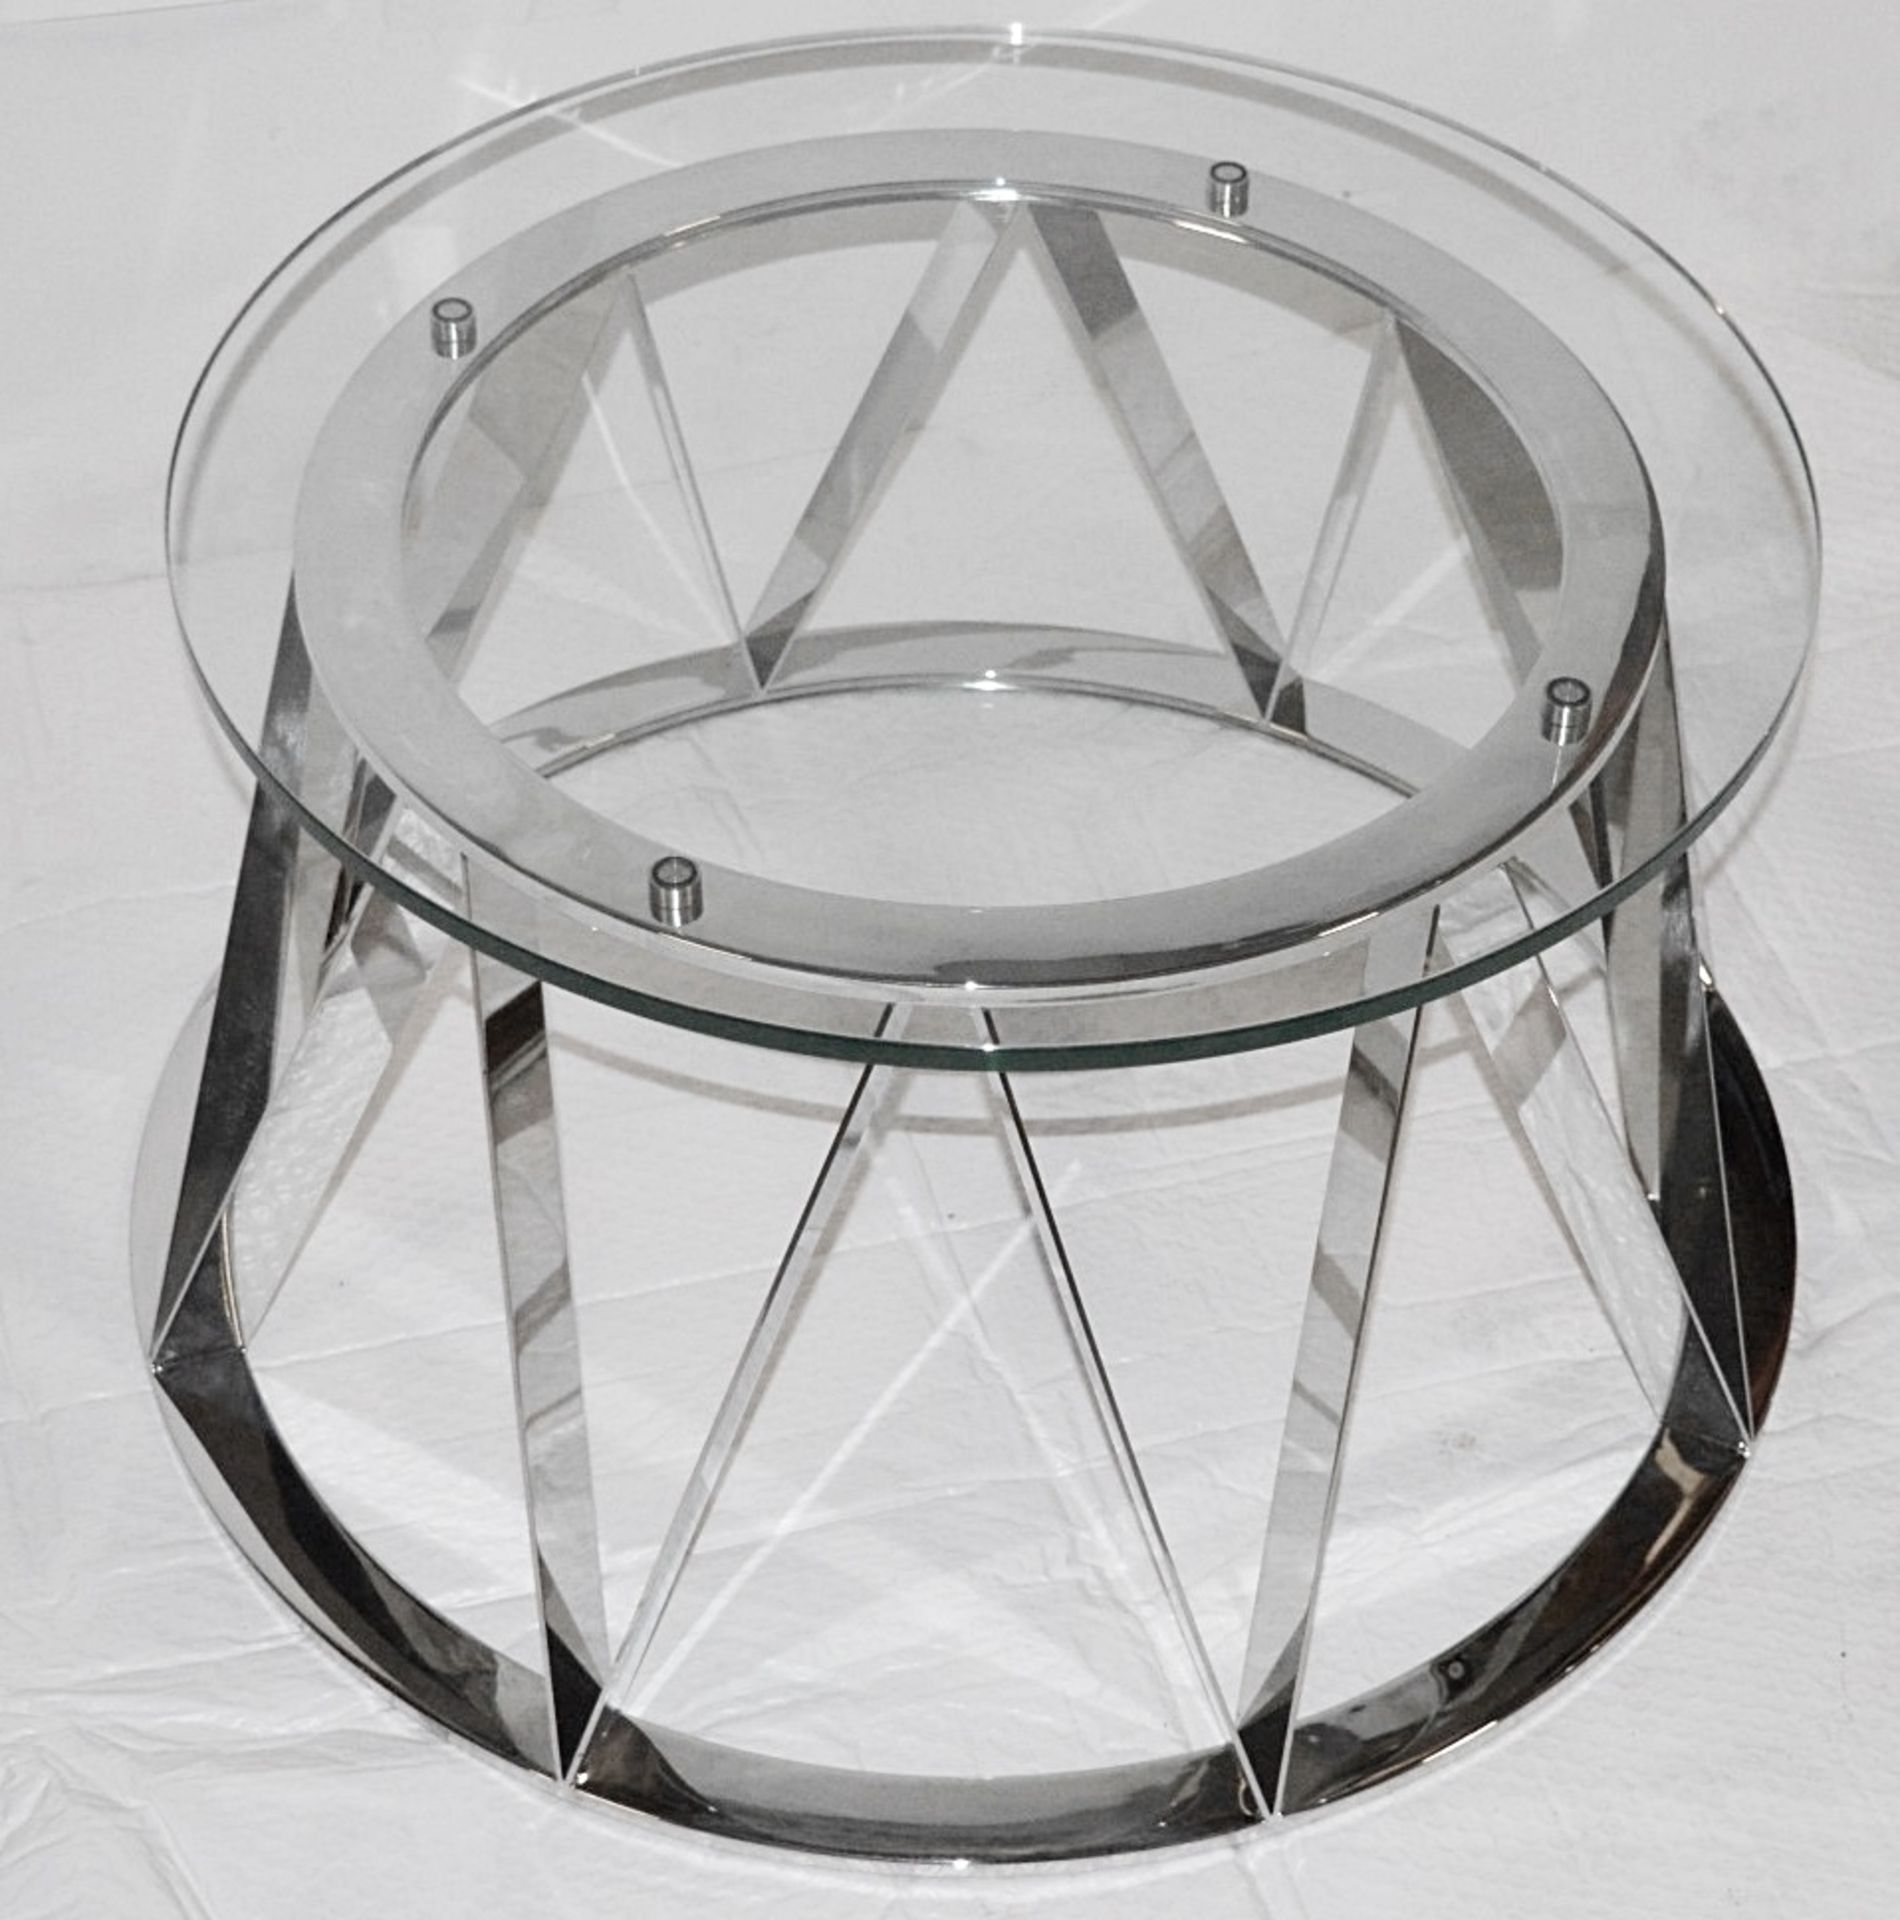 1 x Chelsom Drum-shaped Glass Topped Designer Lamp Table - Dimensions: Diameter 60cm x H38cm - - Image 2 of 4